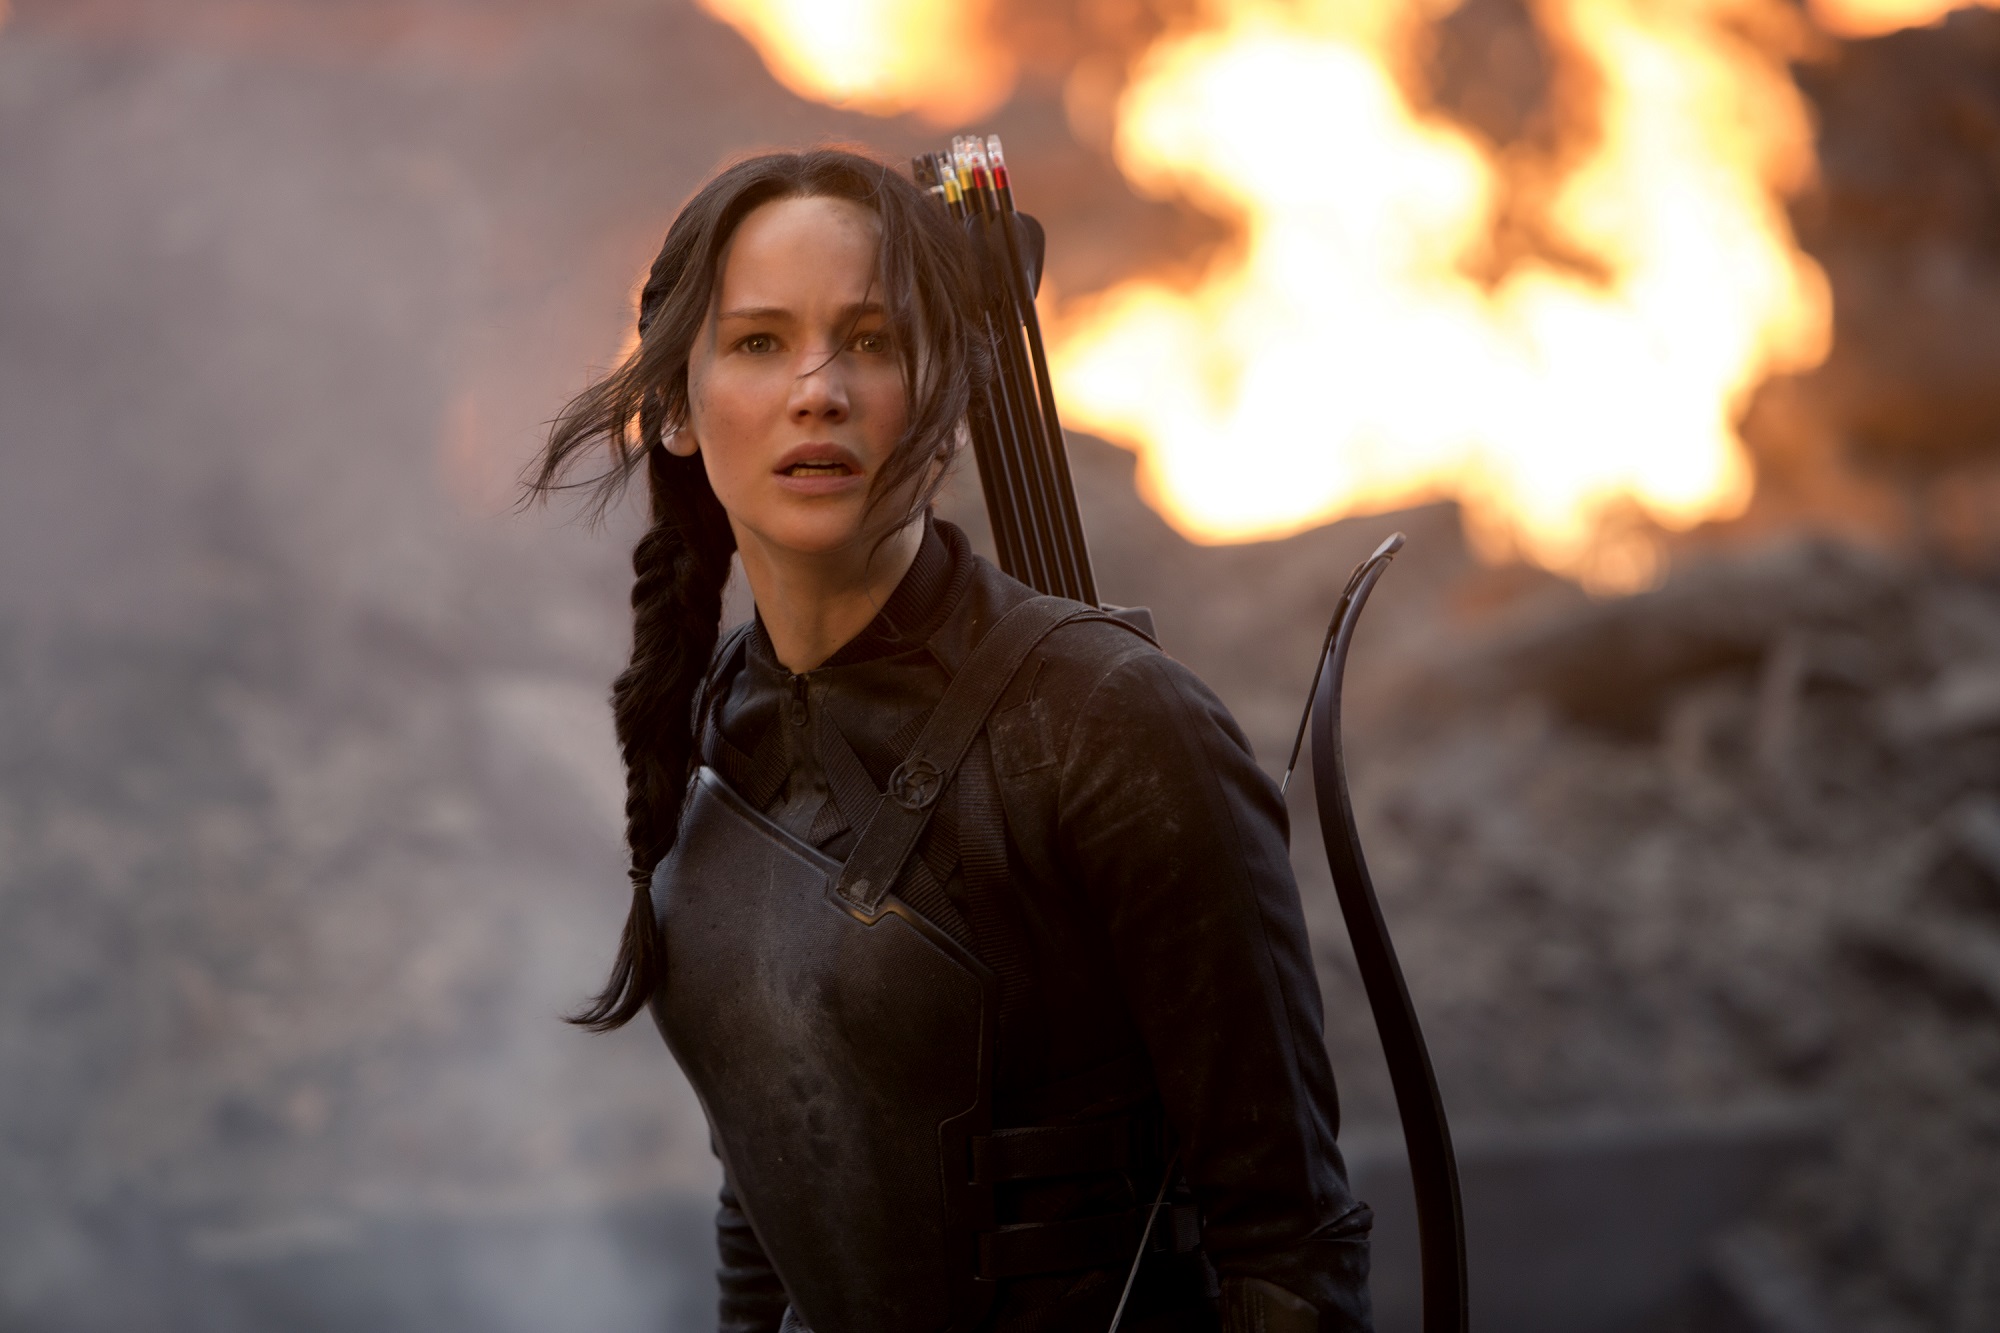 'the hunger games: mockingjay part 2' promo poster reveal